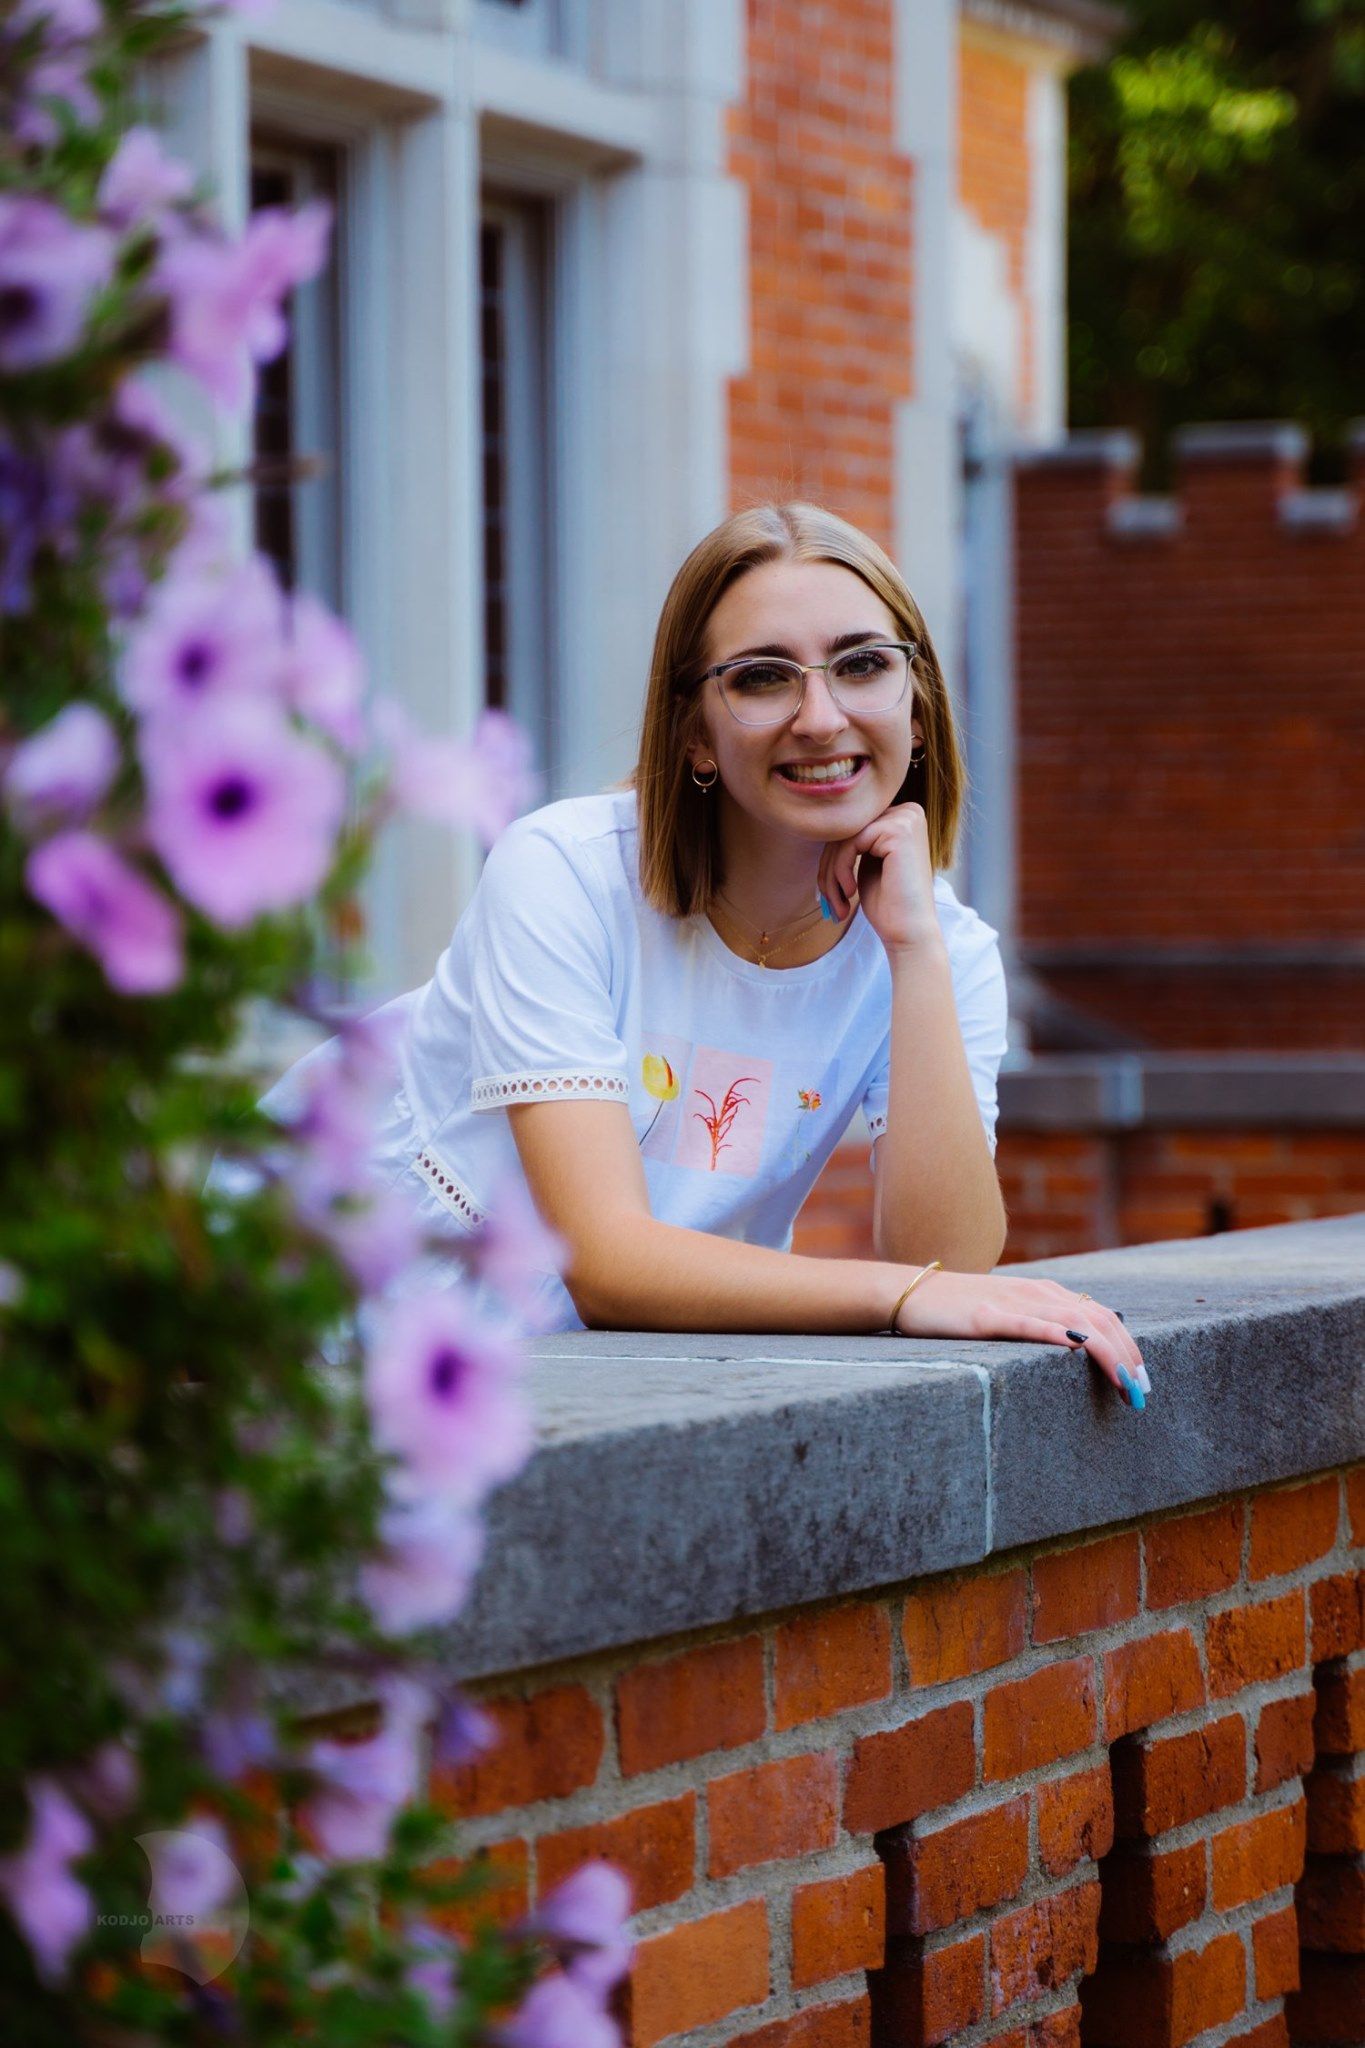 Senior eaning on a brick wall with purple flowers in the background.